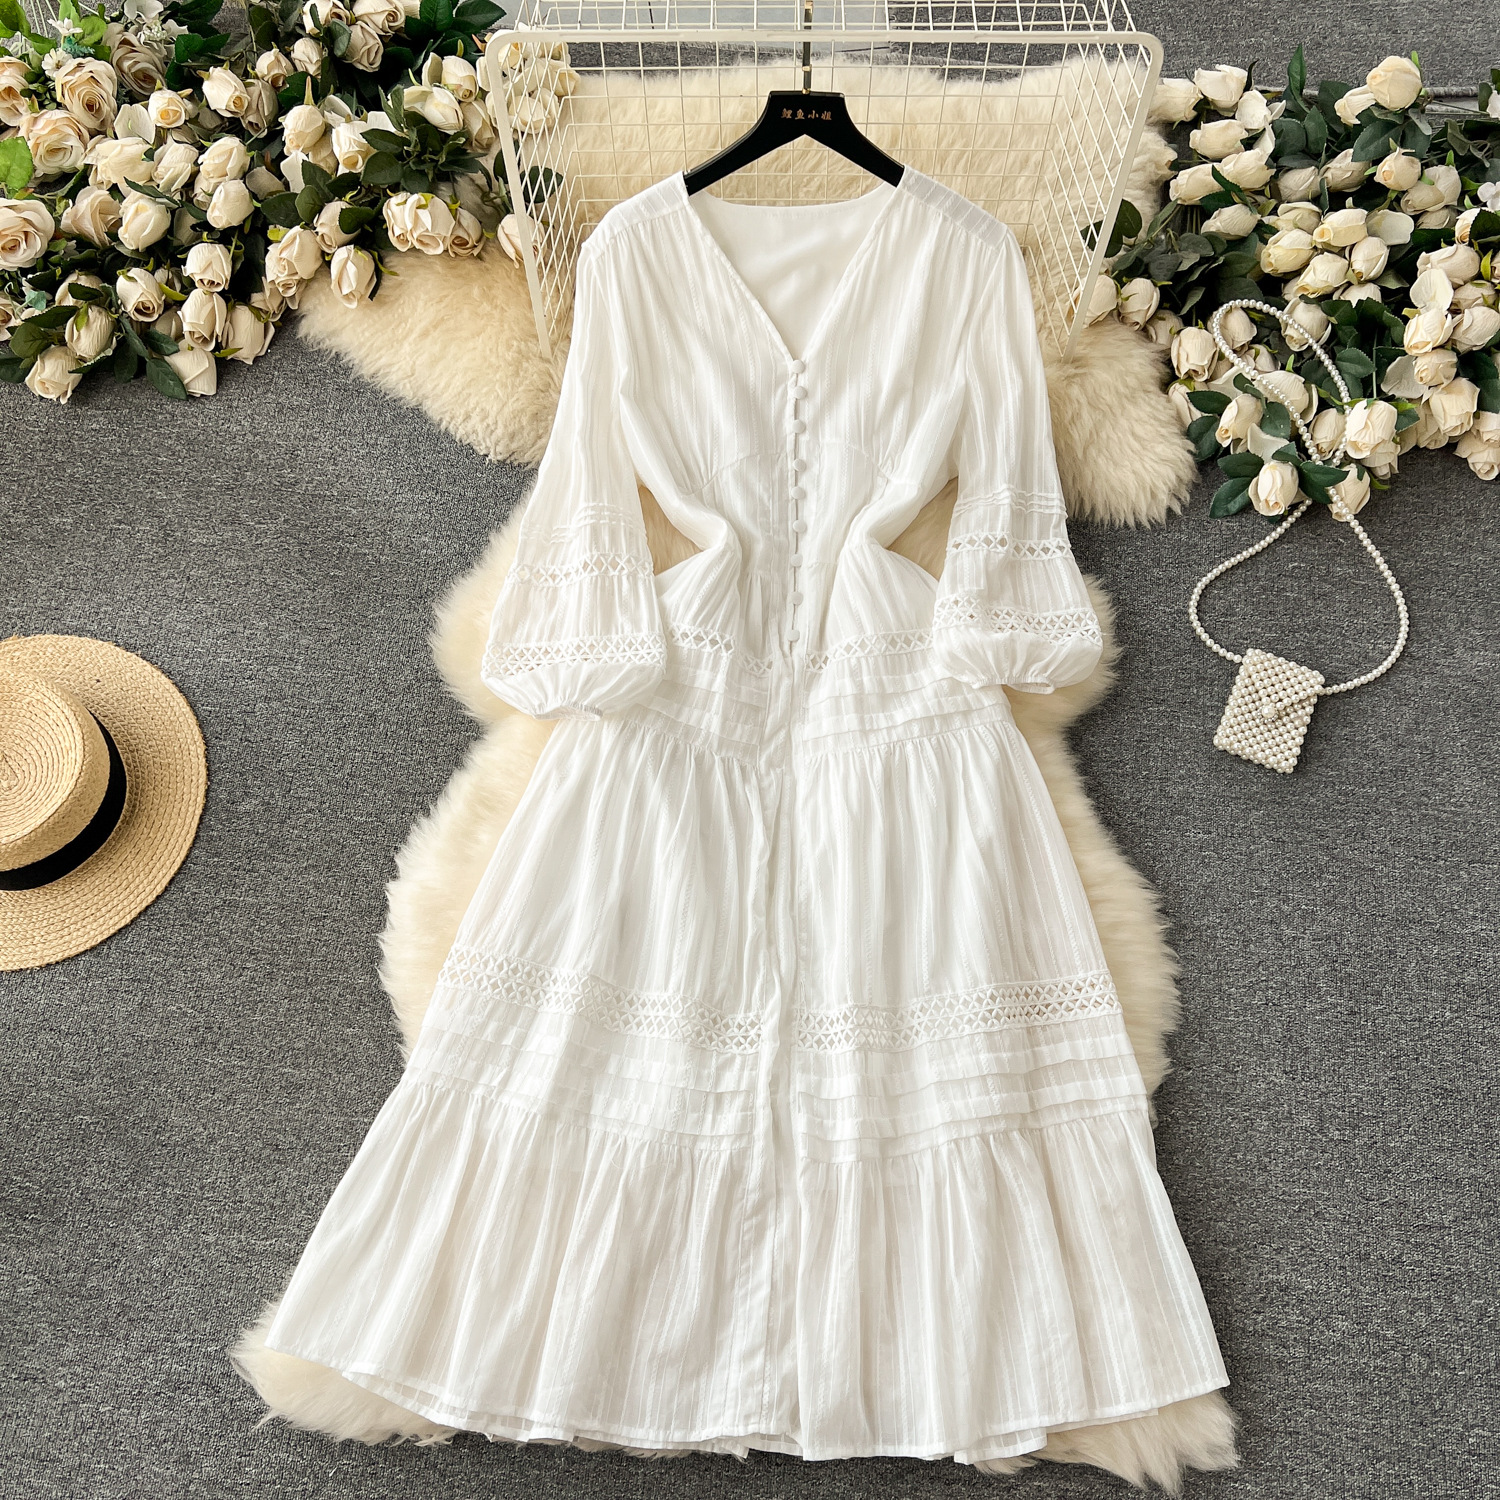 Bohemian vacation style dress design with hollow bubble sleeves, button fit, slim fit, mid length style, elegant dress for women